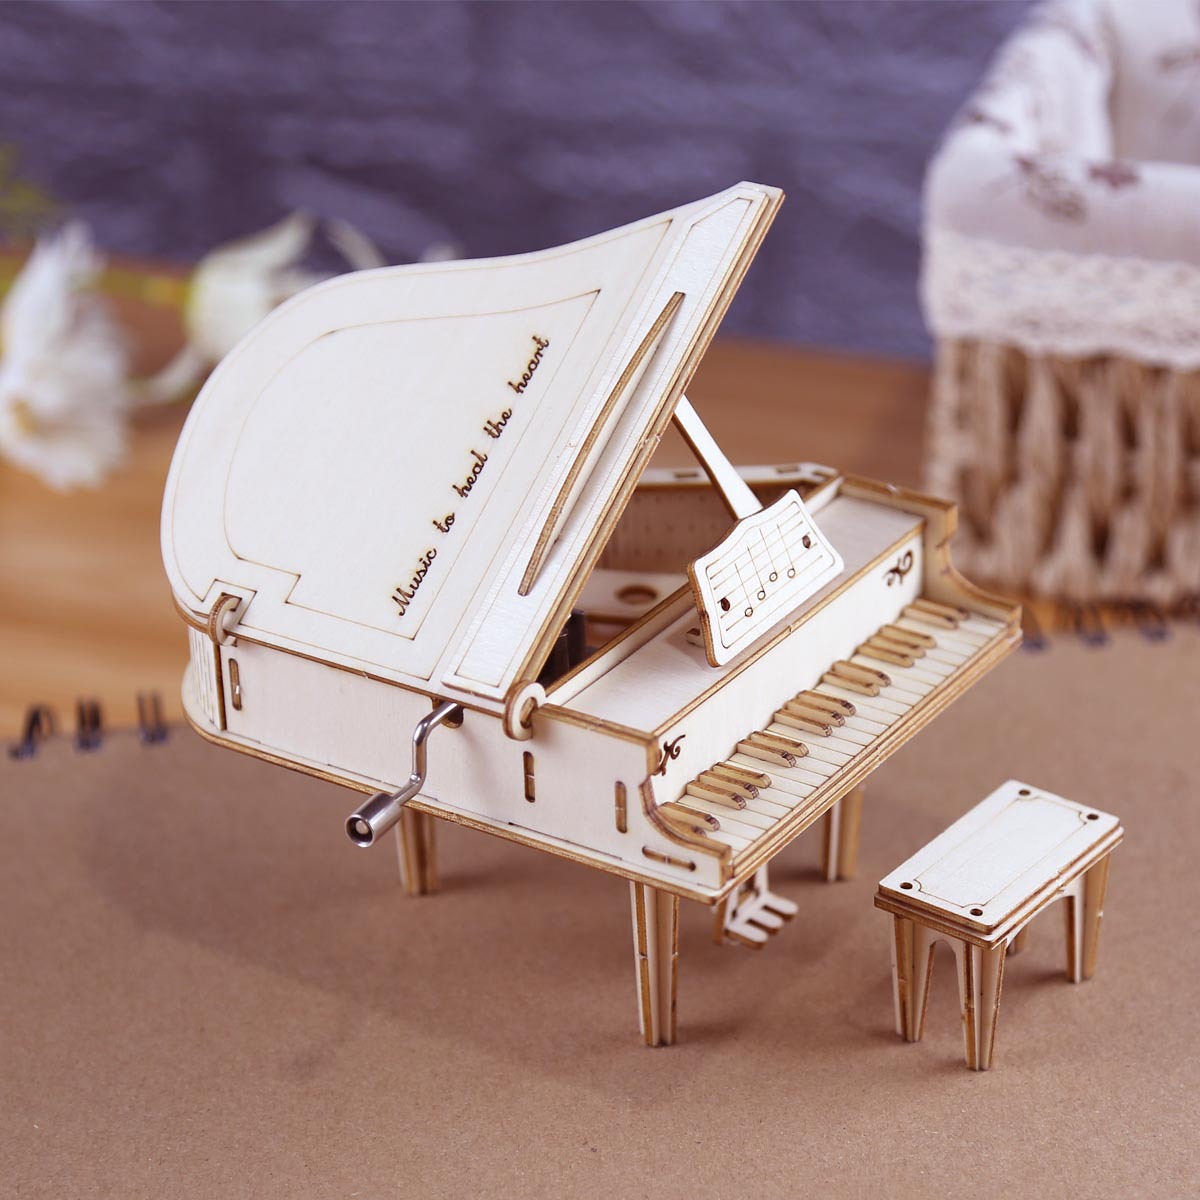  Hands Craft DIY 3D Wooden Puzzle – Grand Piano Musical